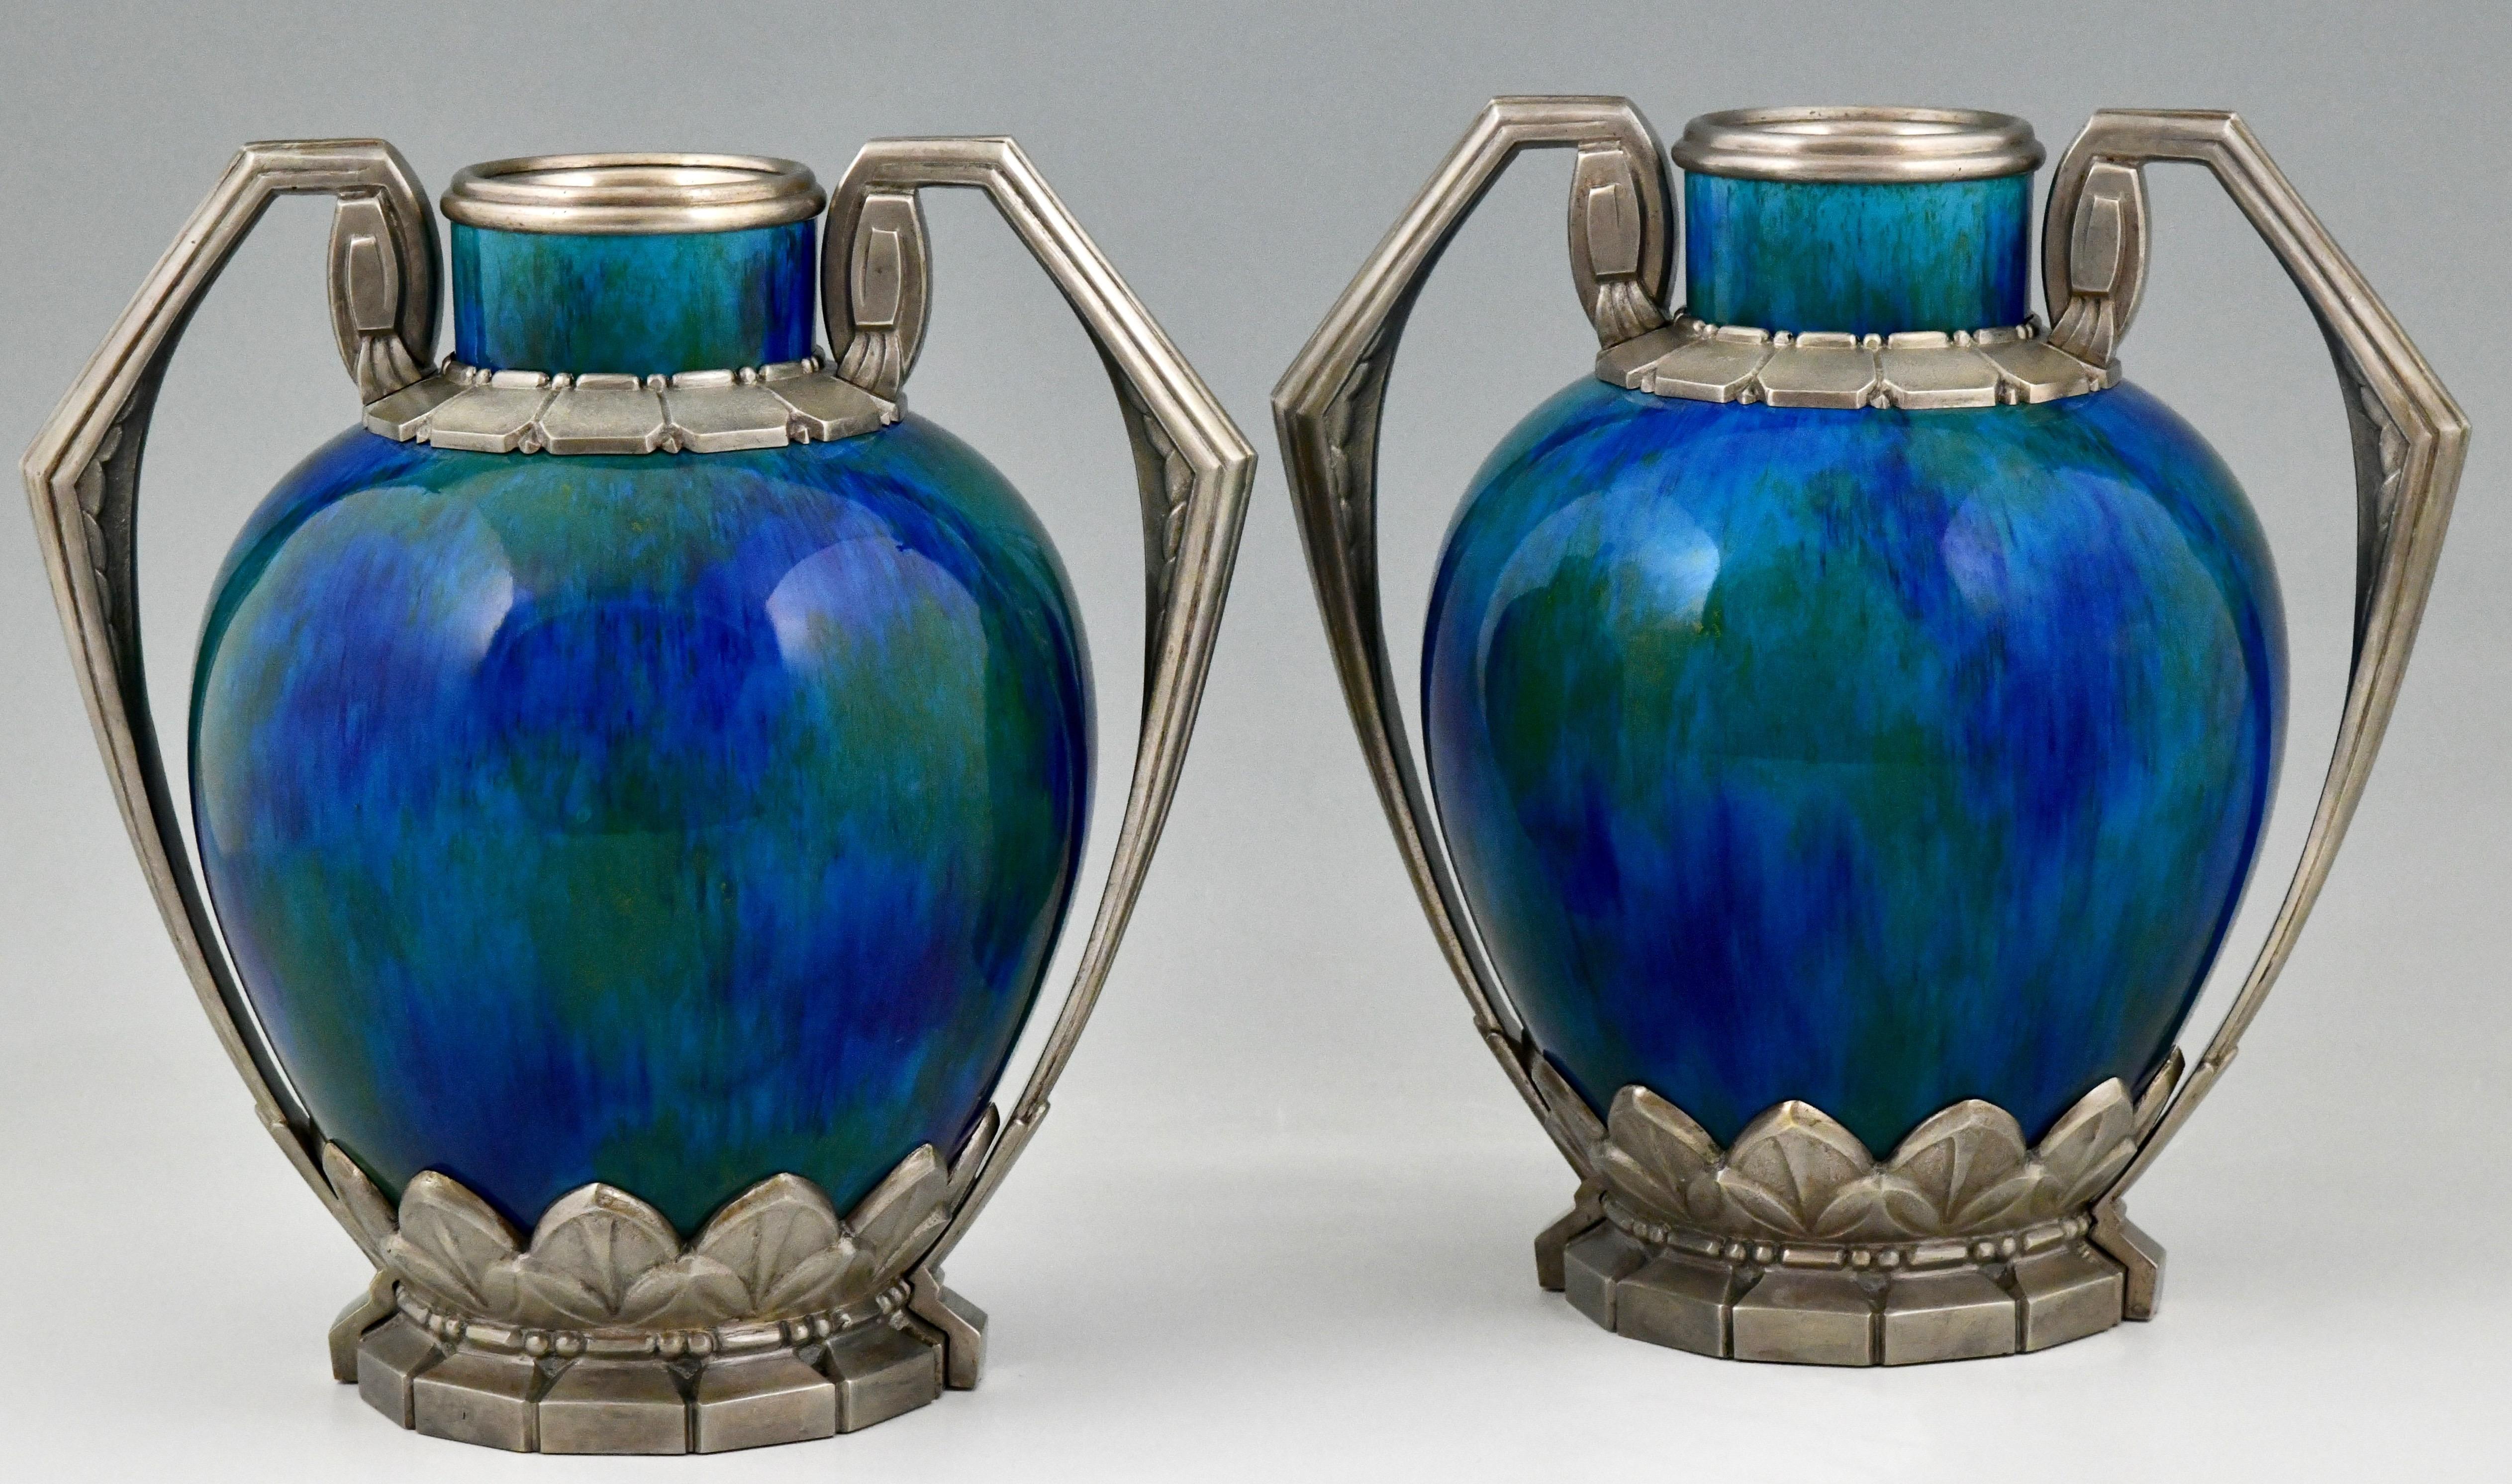 A pair of French Art Deco ceramic vases with ��“blue flambé” glaze and silvered bronze mounts.
There are gold specks in the intense colored green/blue glaze.
Designed by Paul Milet (1870-1950) for Sèvres, France, 1920. 
Marked: MP and Sèvres dotted